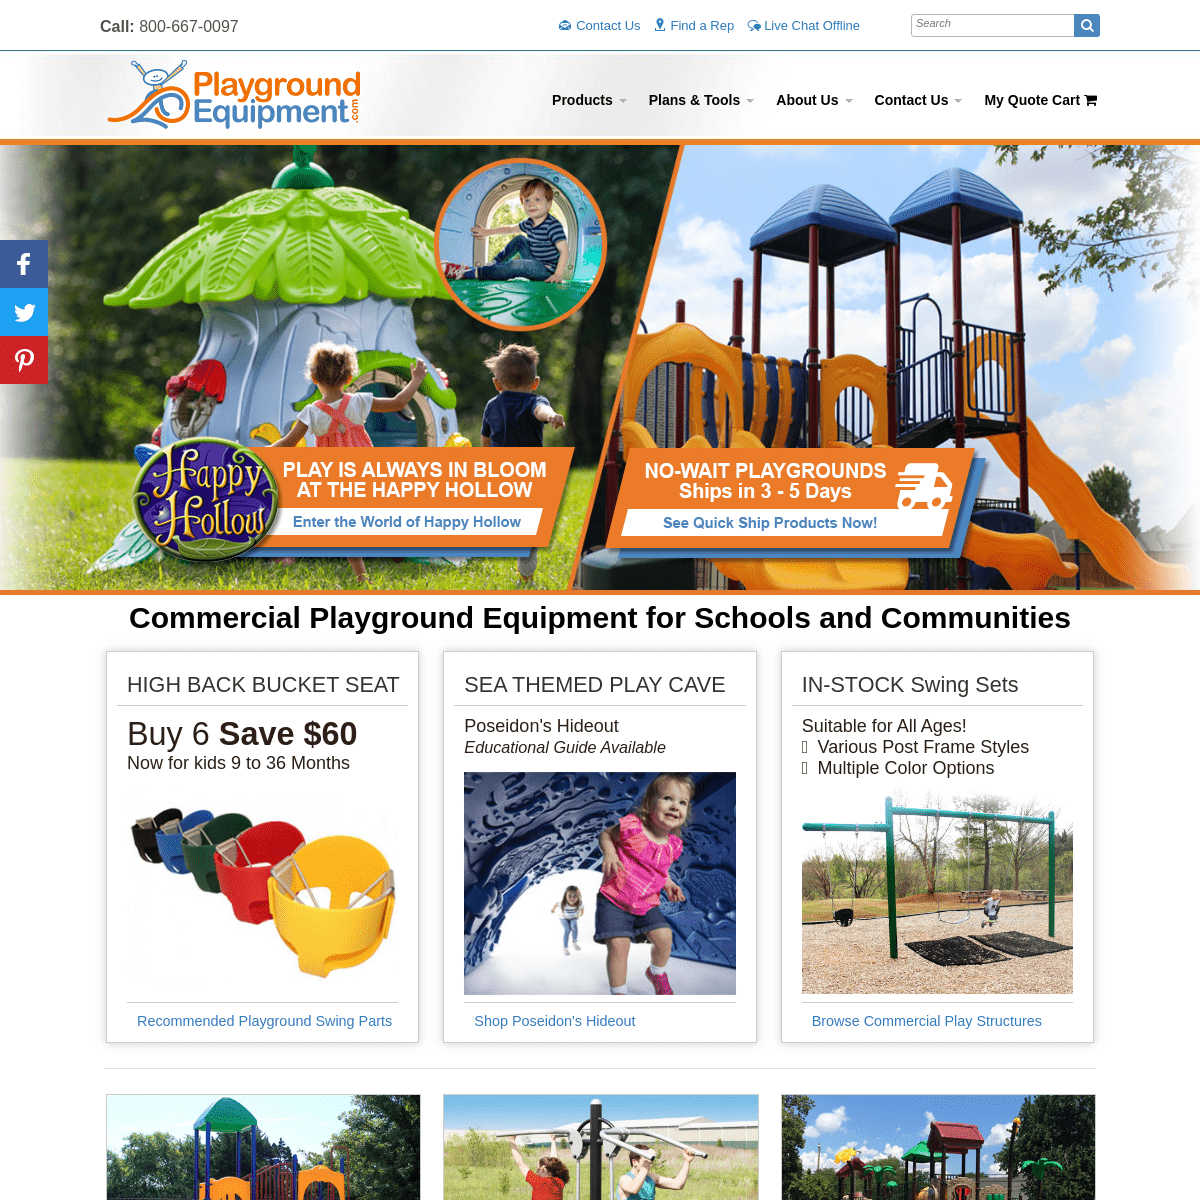 A complete backup of playgroundequipment.com